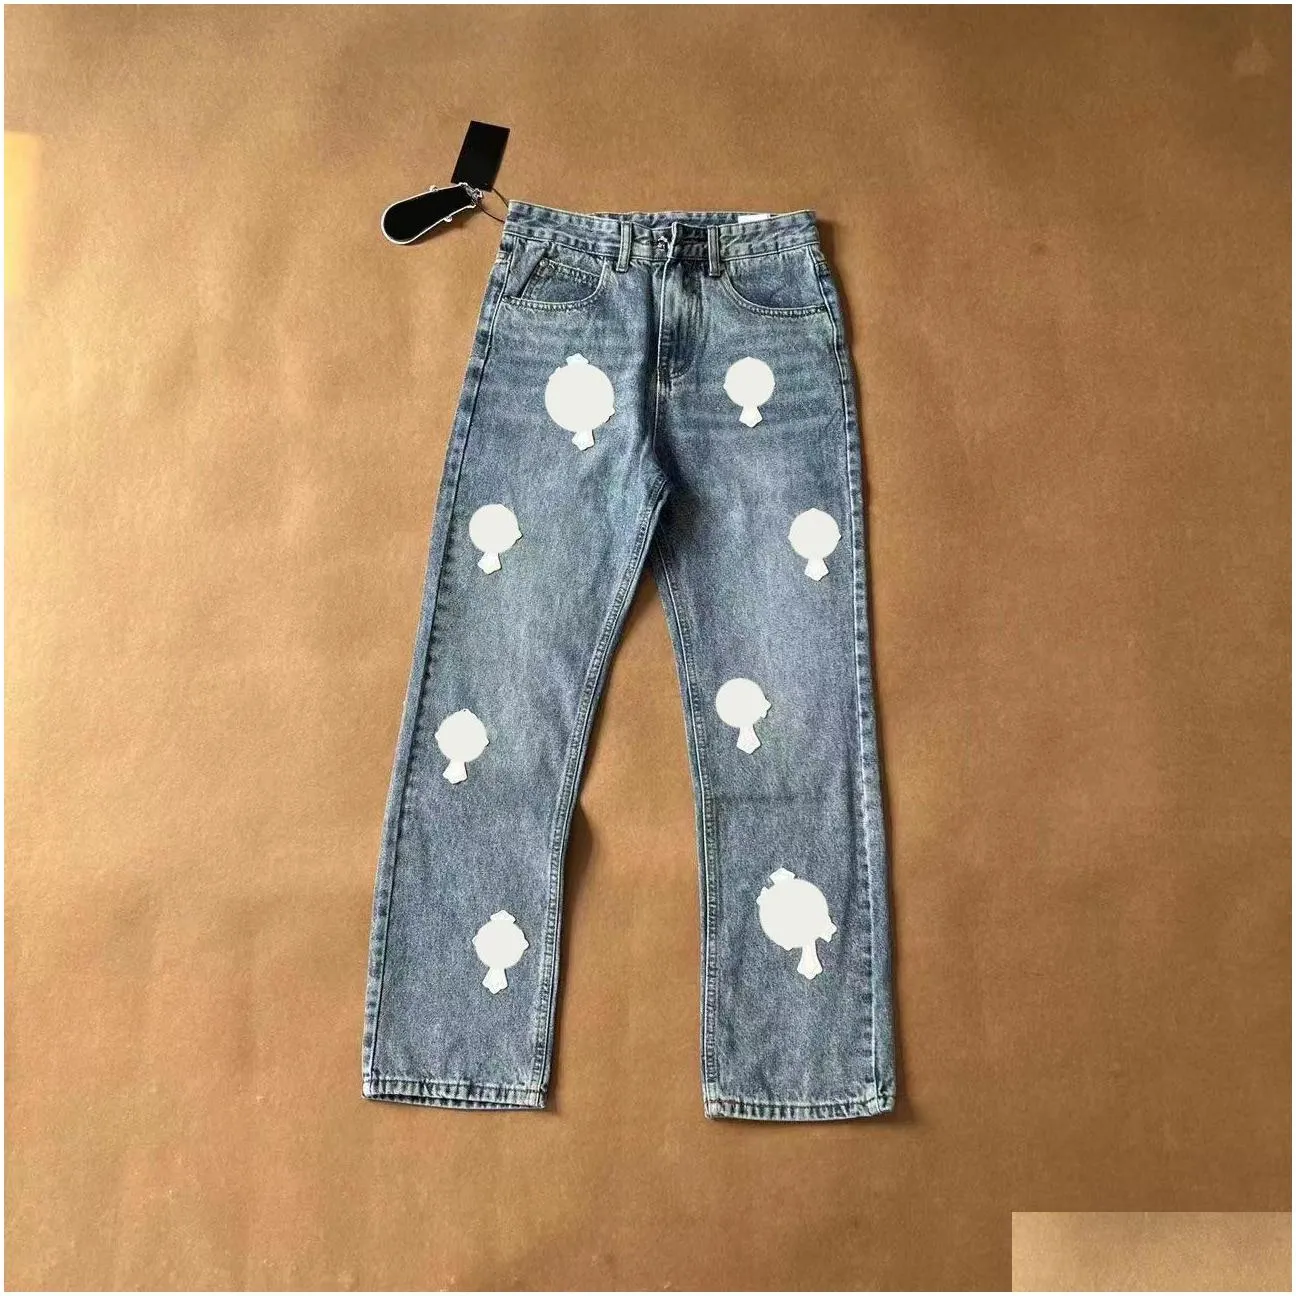 2023 Mens Jeans Designer Make Old Washed Jeans Chrome Straight Trousers Heart Prints for Women Men Casual Long Style Blue Black chromees hearts Purple Jeans